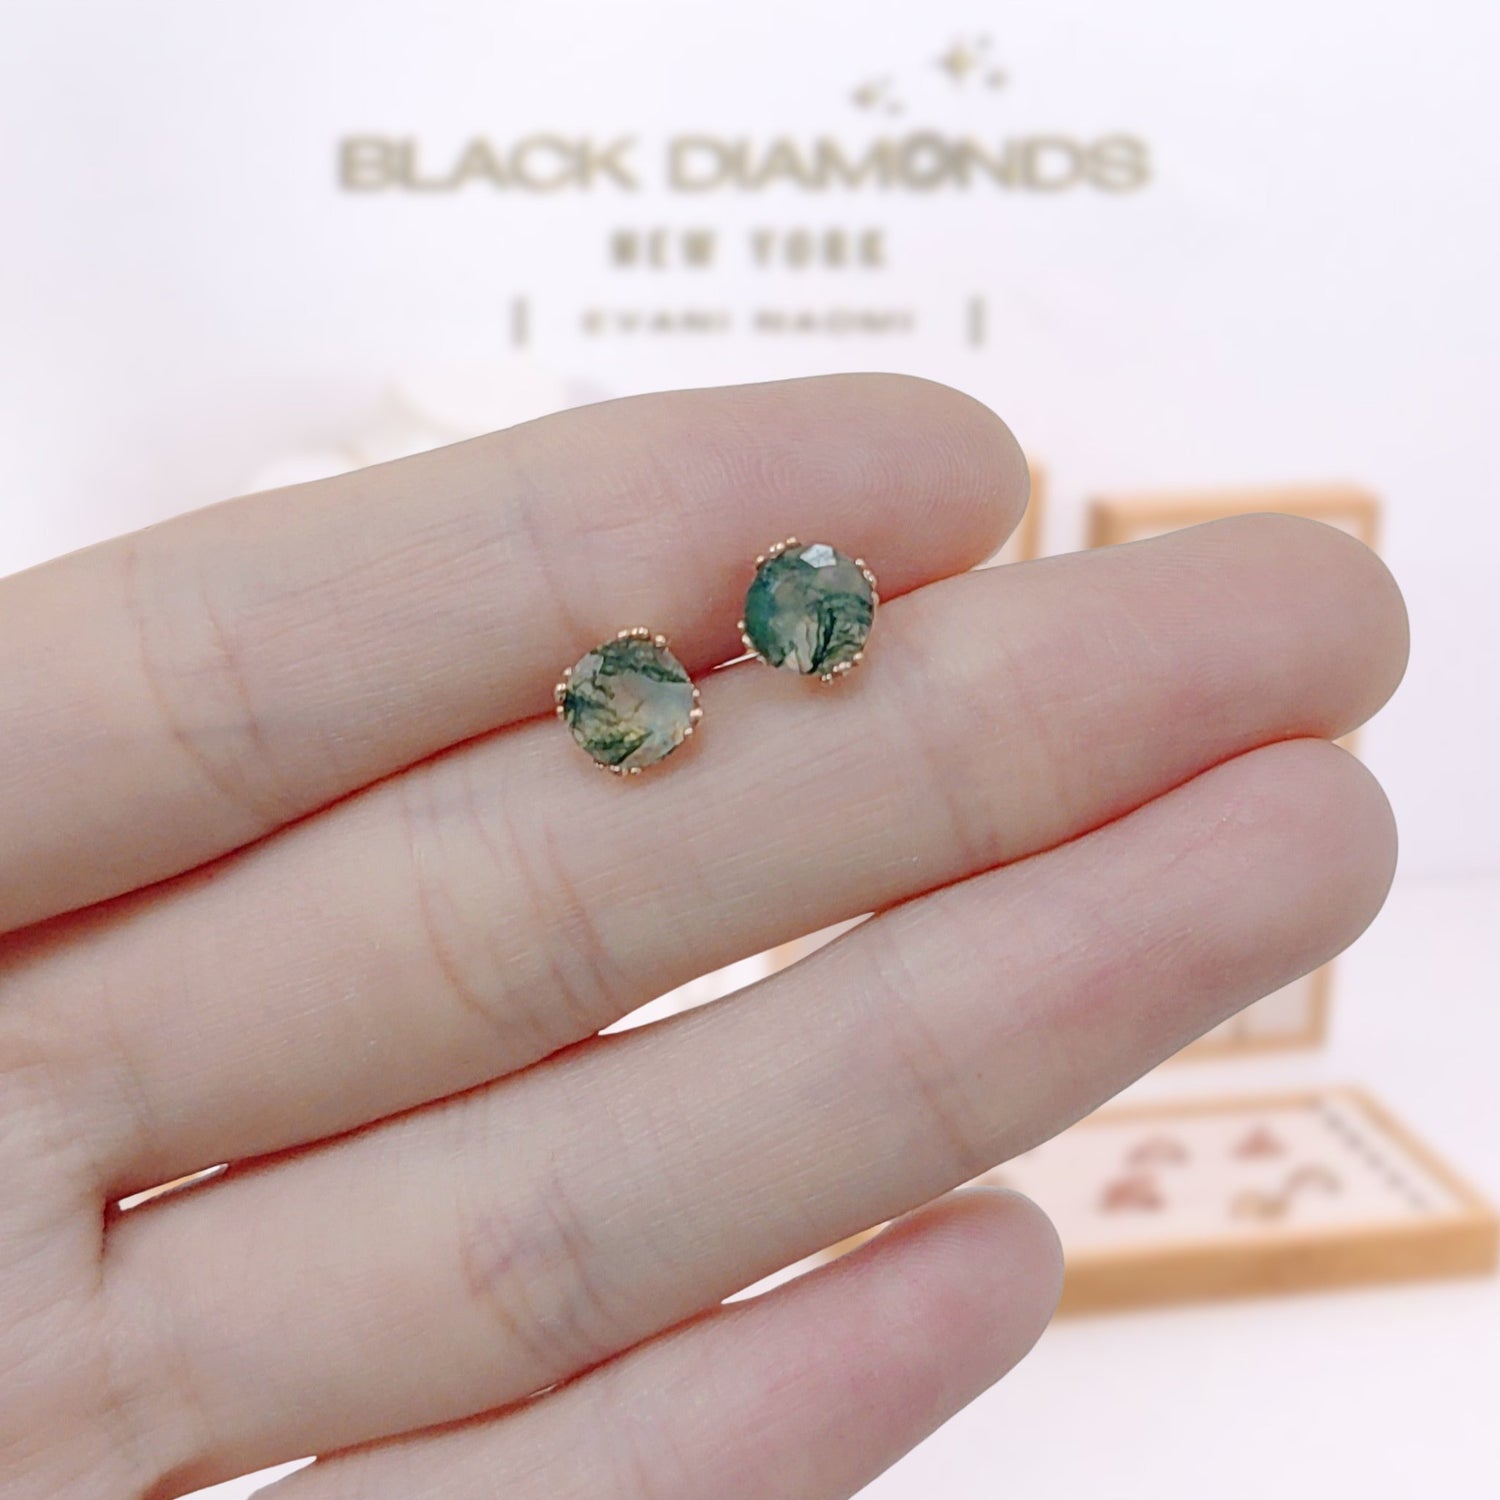 1.0Ct 6mm Round Cut Moss Agate Claw Prongs Studs Earrings-Black Diamonds New York